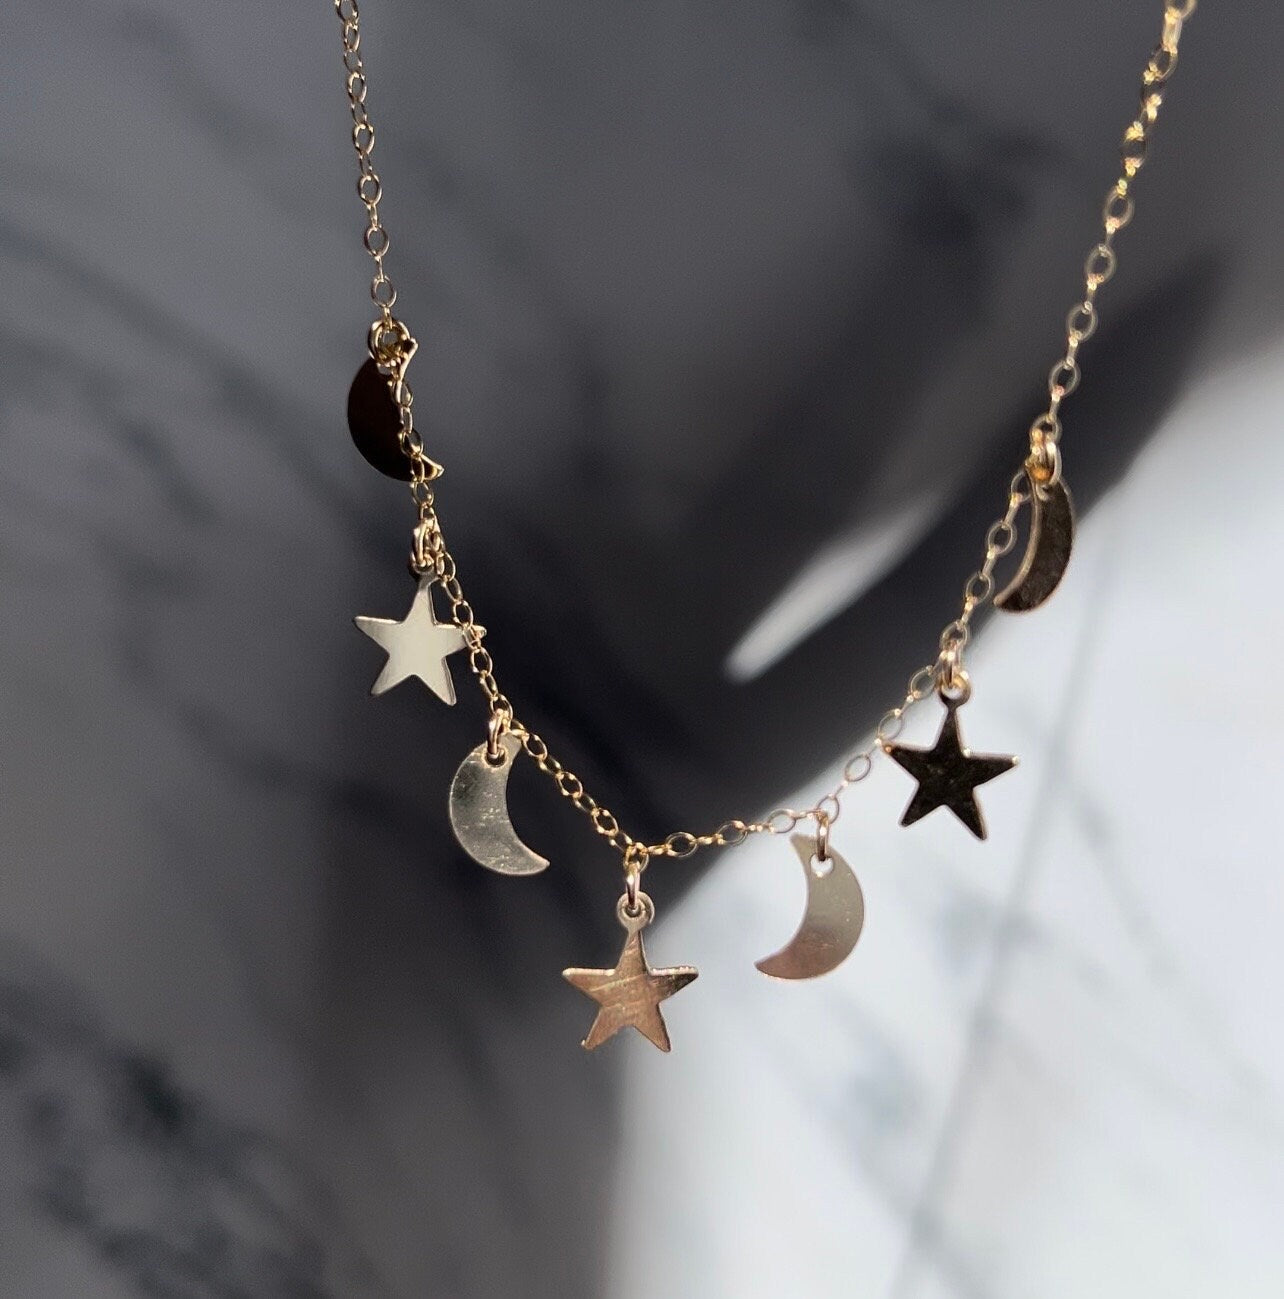 Moon and Stars Necklace, Dainty Charm Necklace, Star Charm Layering Necklace, Moon Charm Necklace, Celestial Necklace Women, Delicate Gold